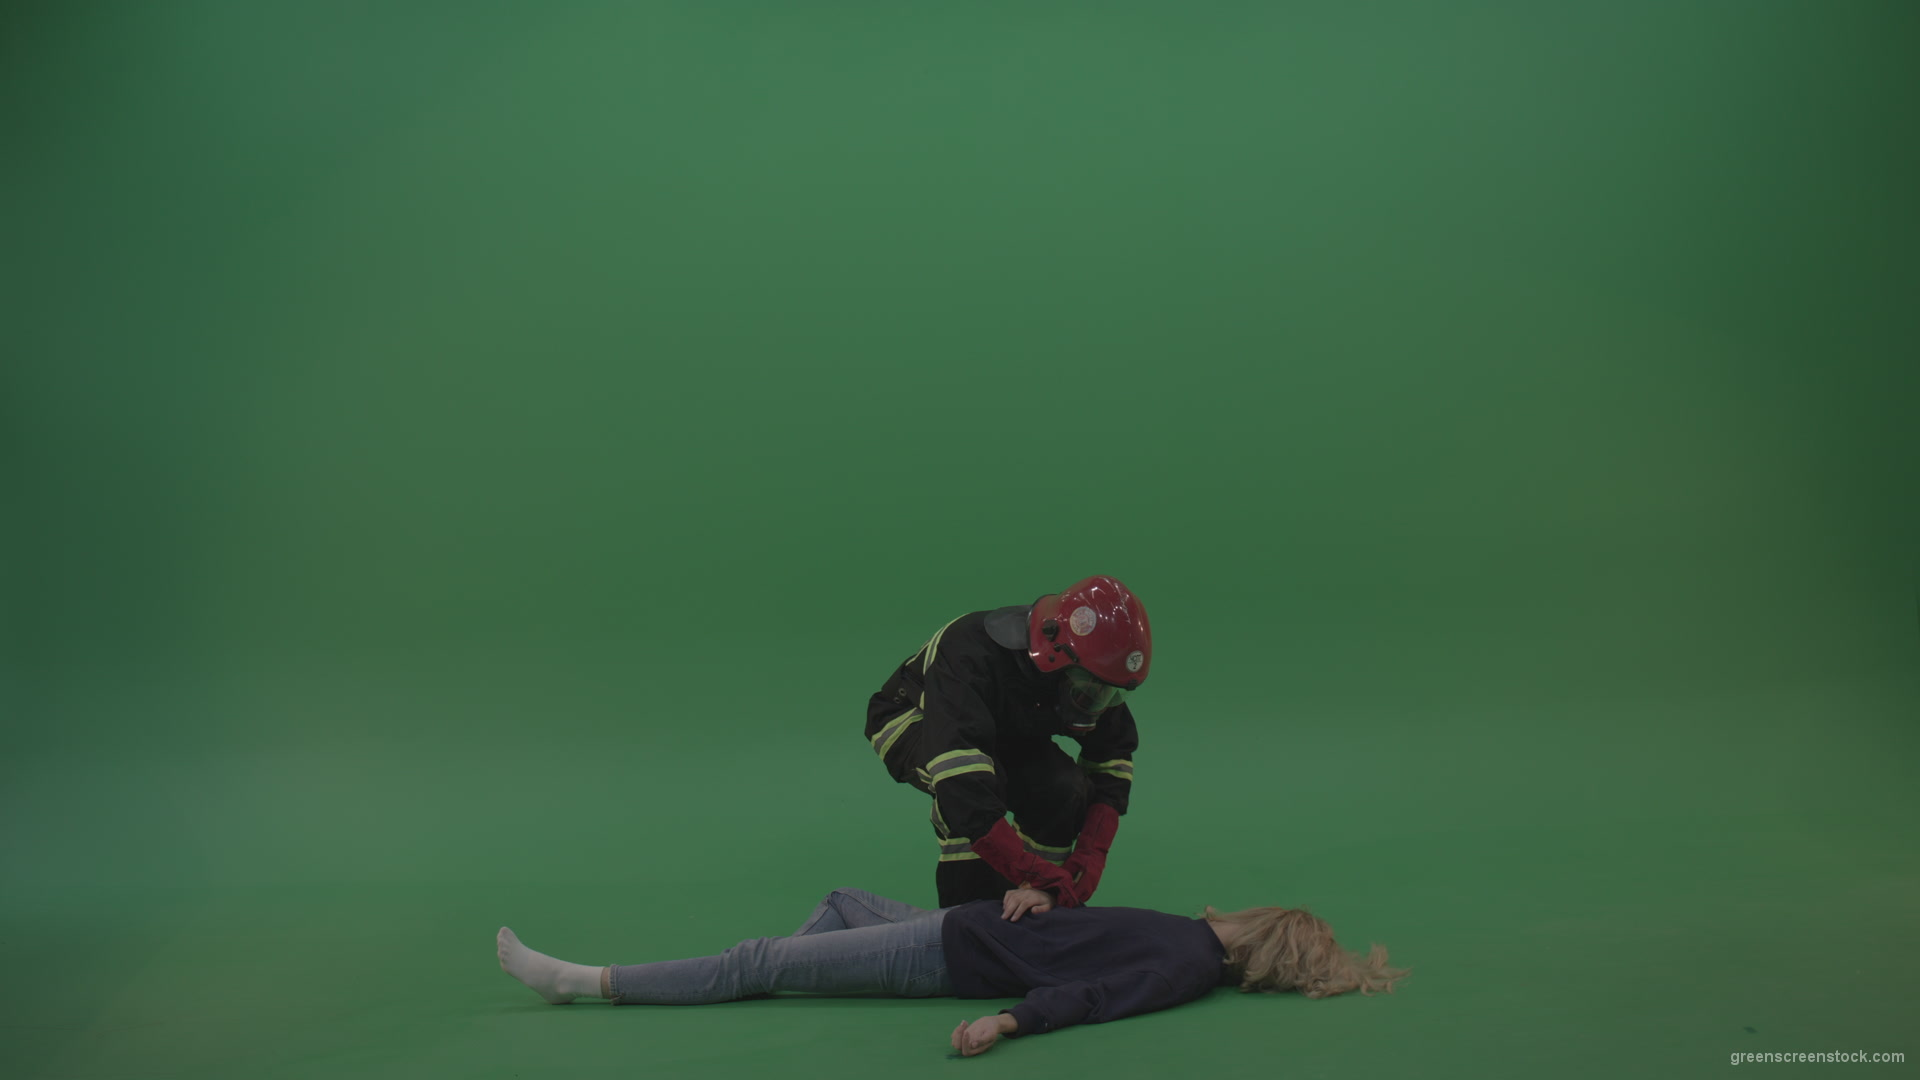 Brave_Fireman_Runs_To_Unconscious_Young_Victim_Girl_Slightly_Wakes_Her_Up_Takes_On_Strong_Hands_And_Carries_Towards_Safety_On_Green_Screen_Wall_Background_004 Green Screen Stock